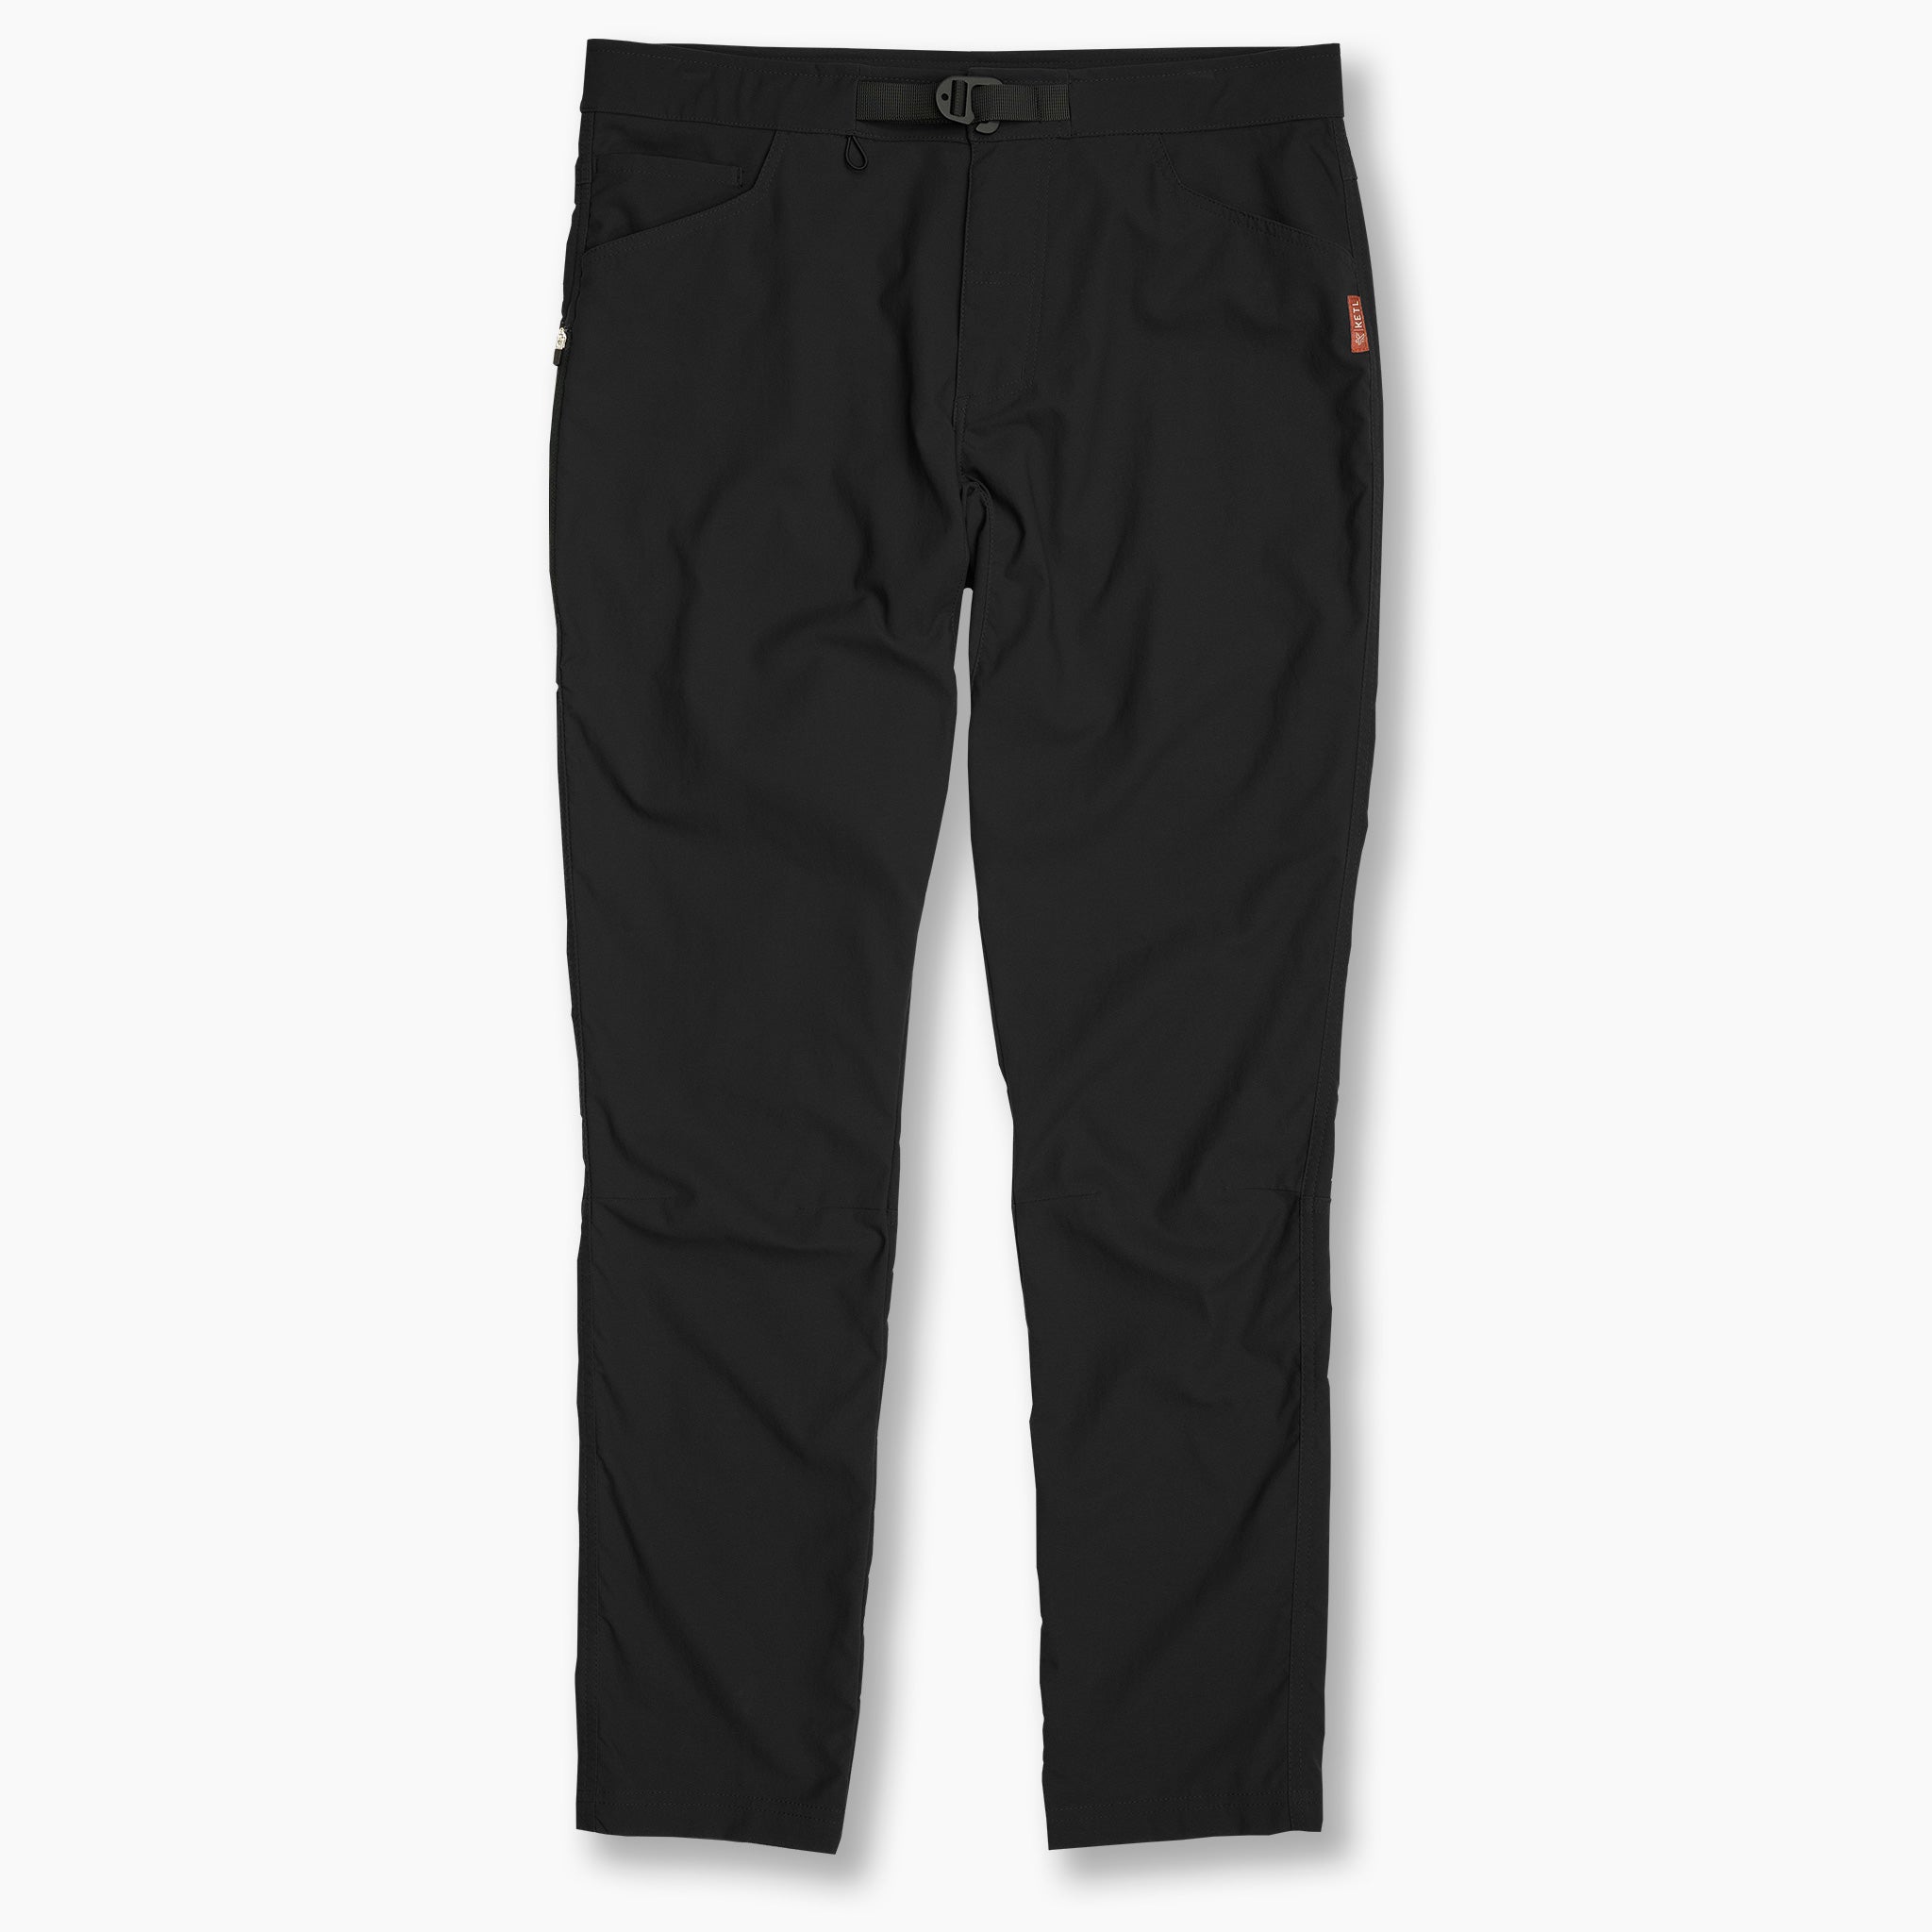 KETL Mtn Shenanigan Pant | Durable, Stretchy, Lightweight Outdoor Pant